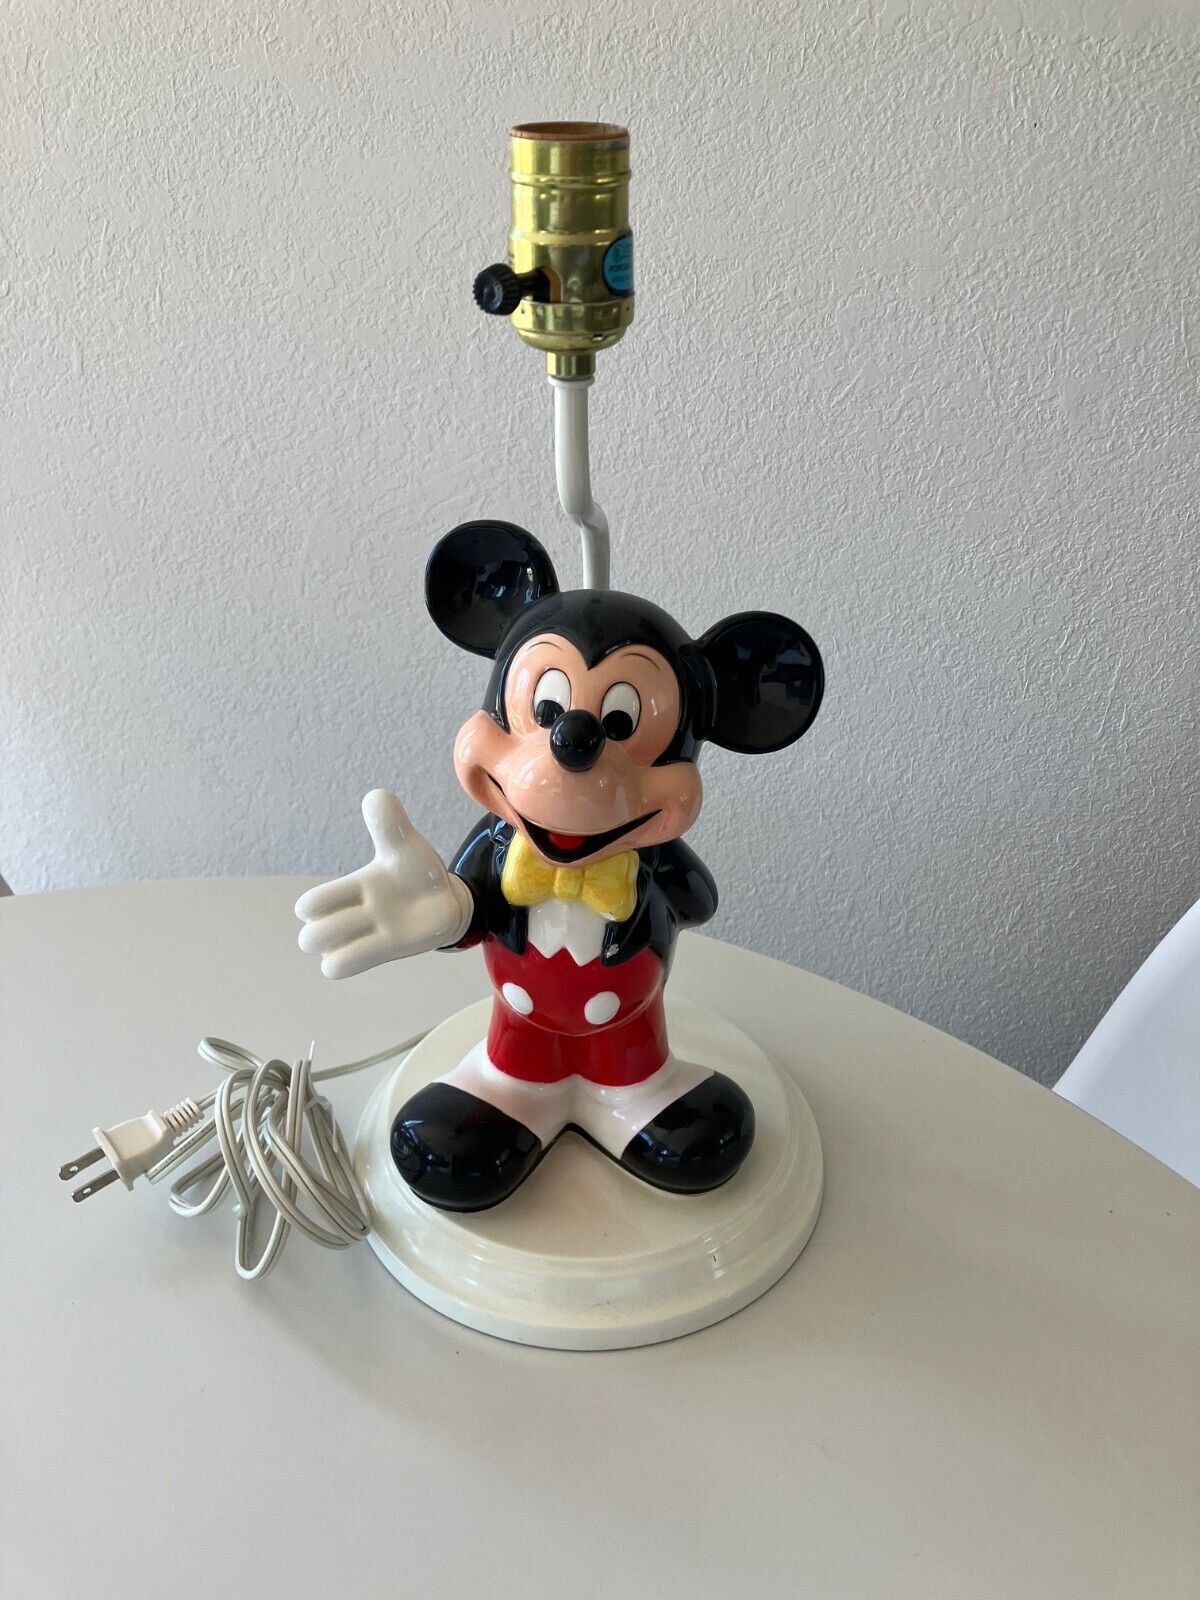 Disney - Mickey Mouse Ceramic Lamp Base - Vintage RARE Working Tested